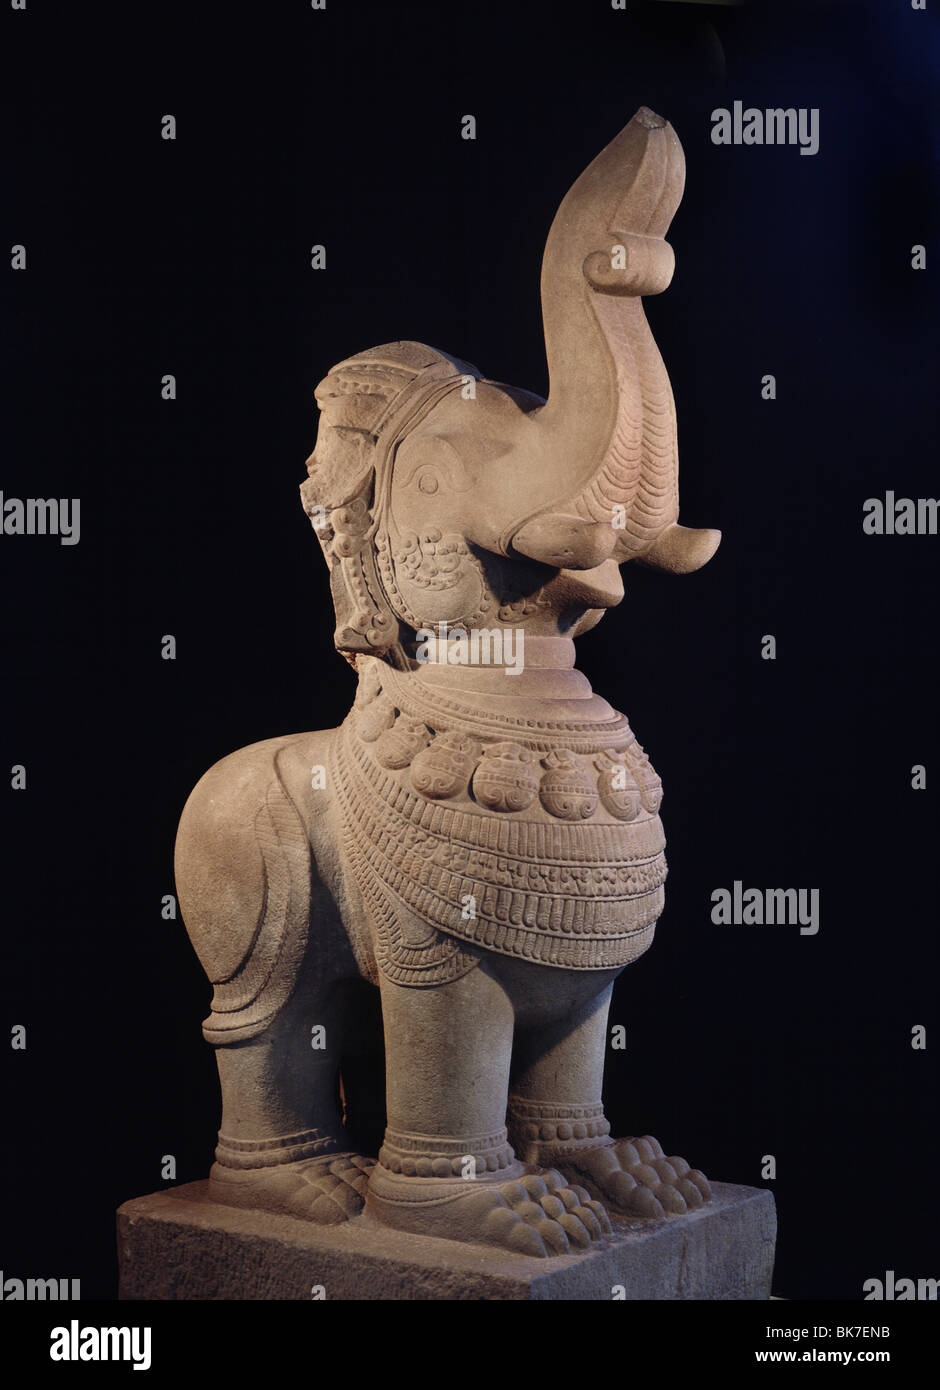 Gajahsimha, Cham art, Thap Mam style dating from the 12th century, Cham Museum, Danang, Vietnam, Indochina, Southeast Asia, Asia Stock Photo